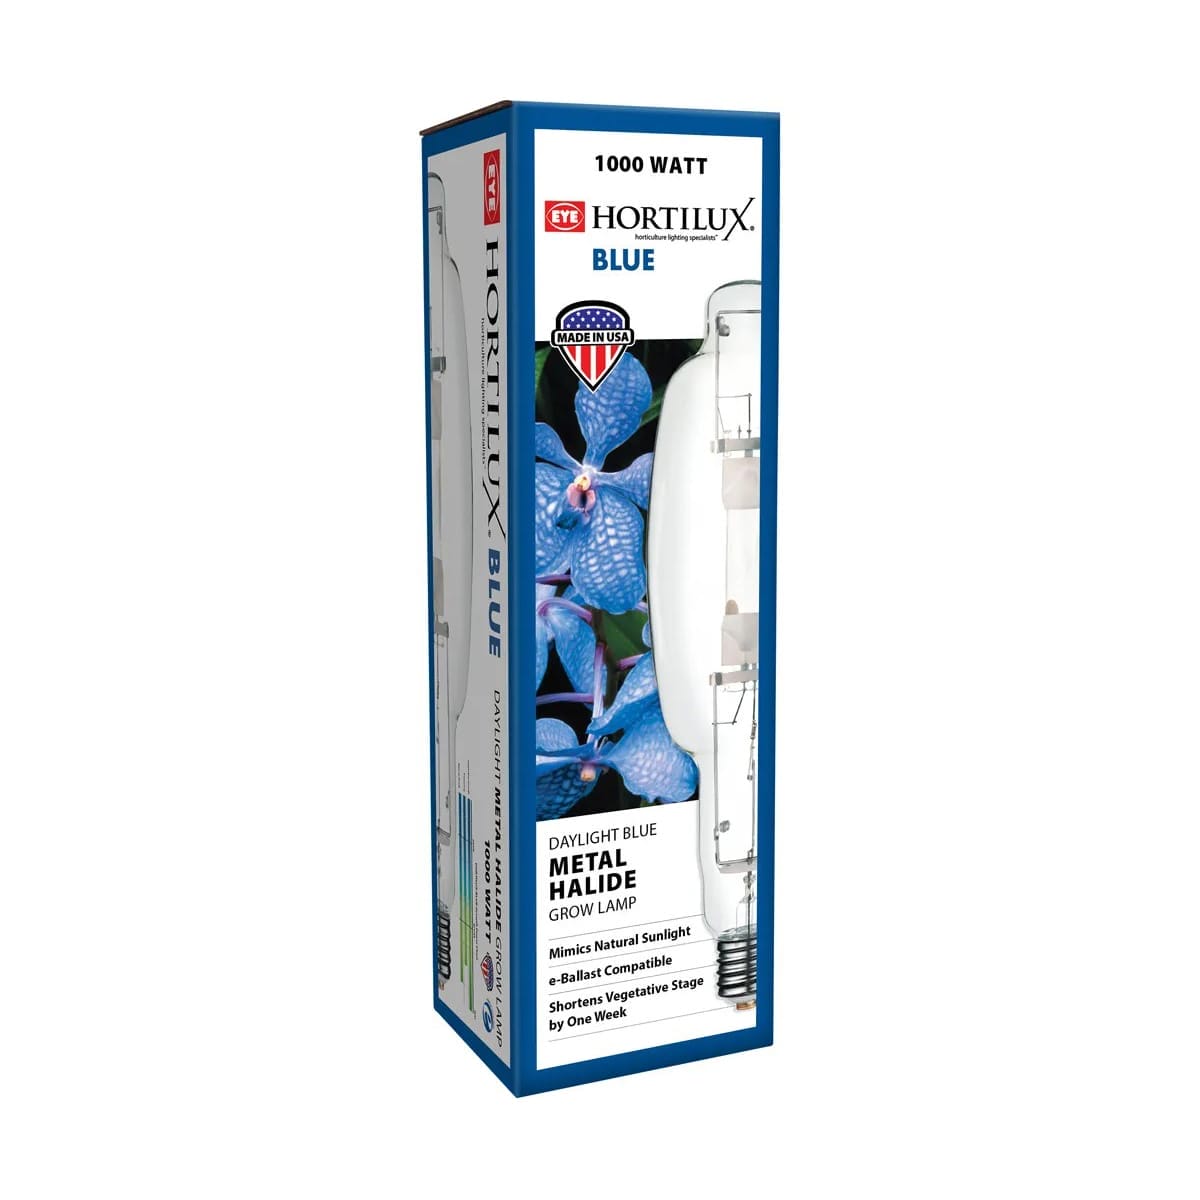 Hortilux 1000w MH Bulb Package